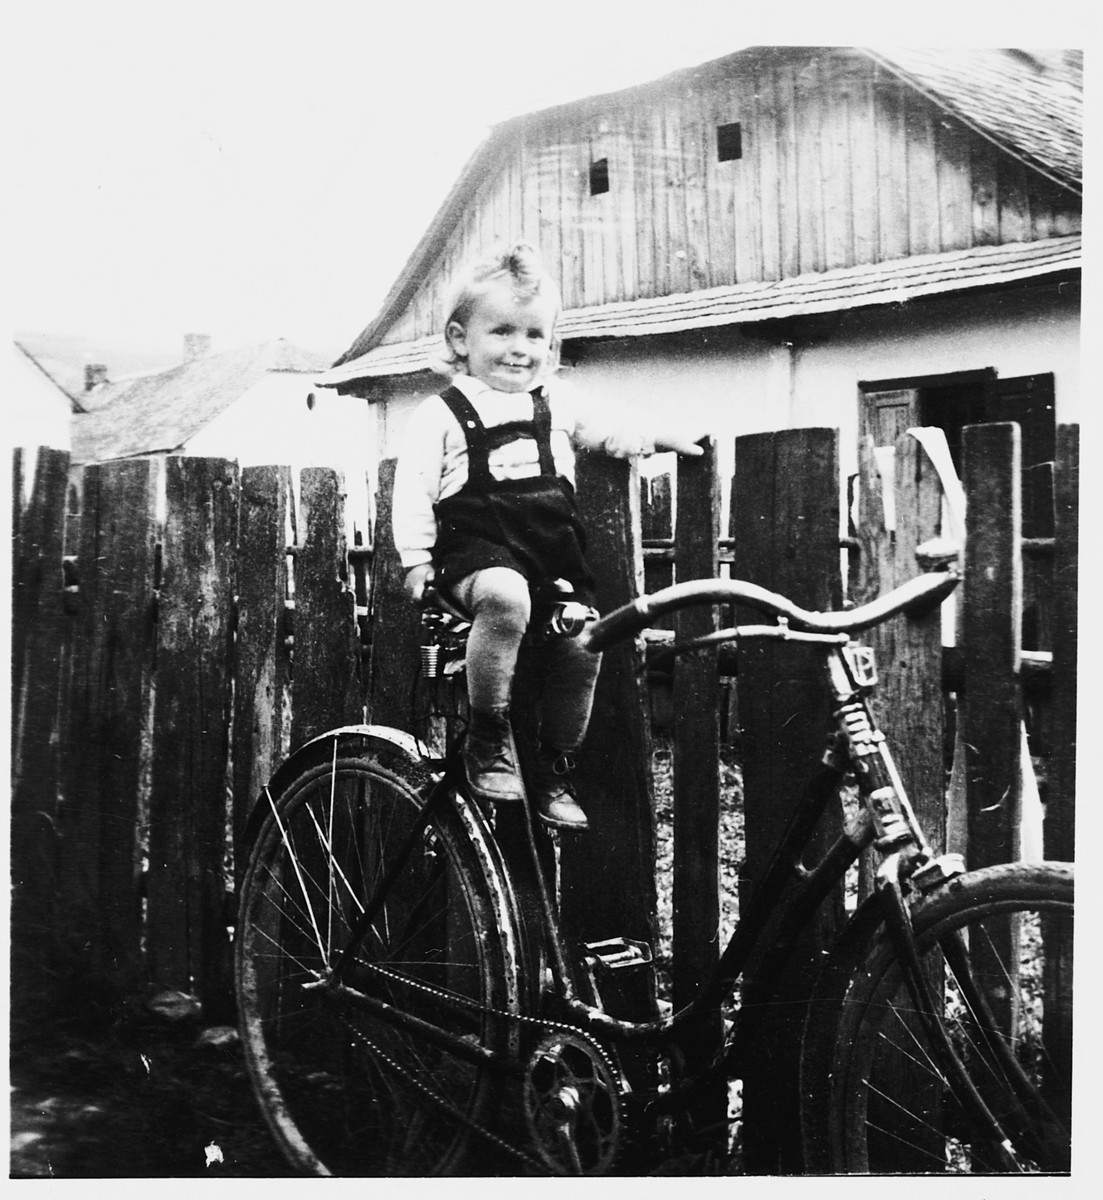 Moshe Thomas sitting on a bicycle near his grandmother's home in Nizni Verecky.